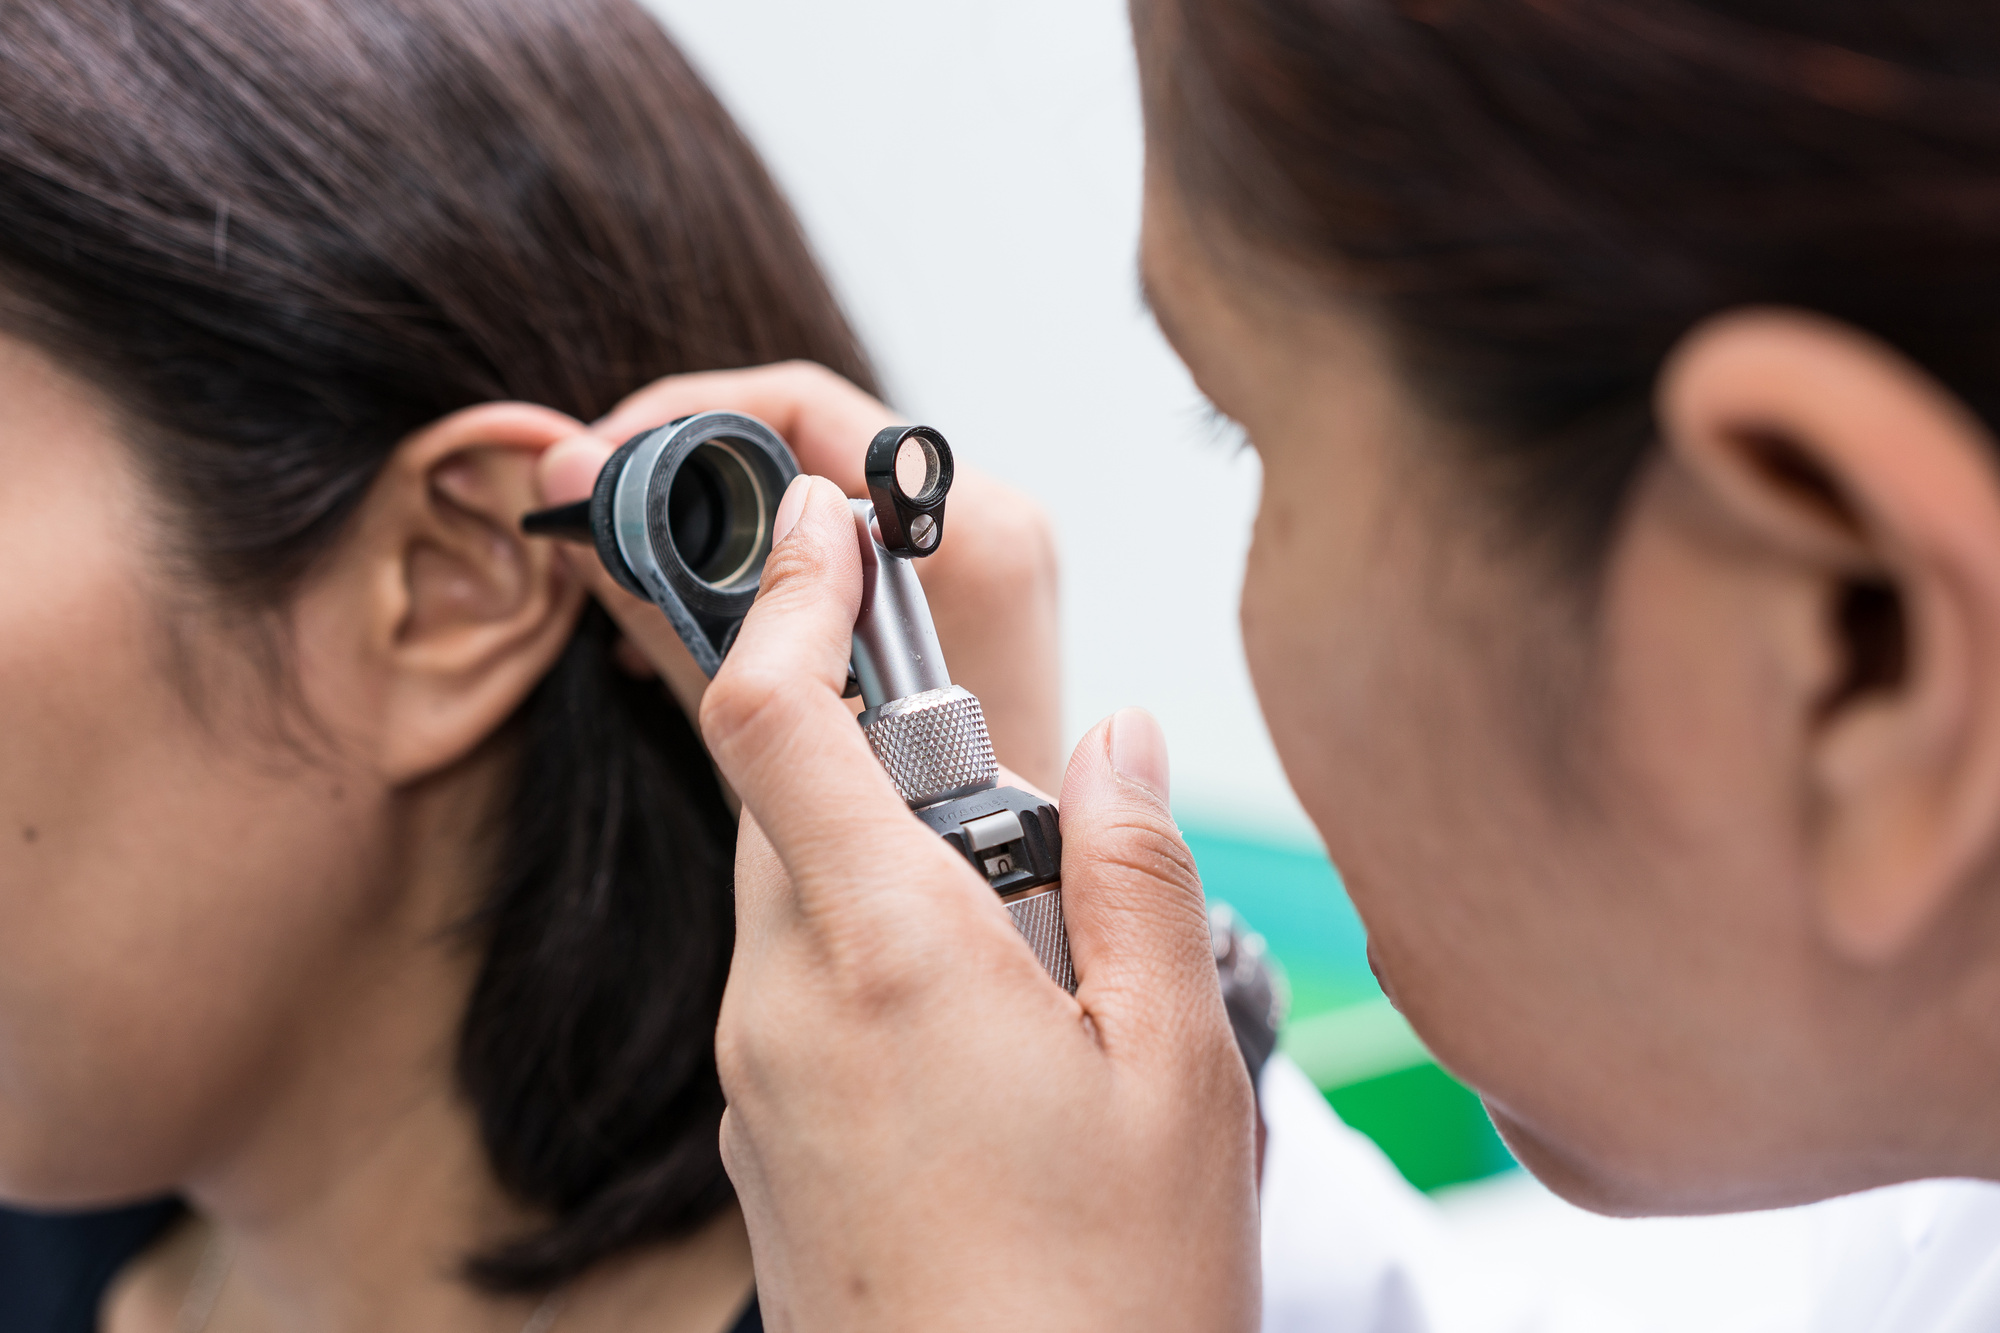 How to Know It’s Time to Visit the Audiologist for a Hearing Check